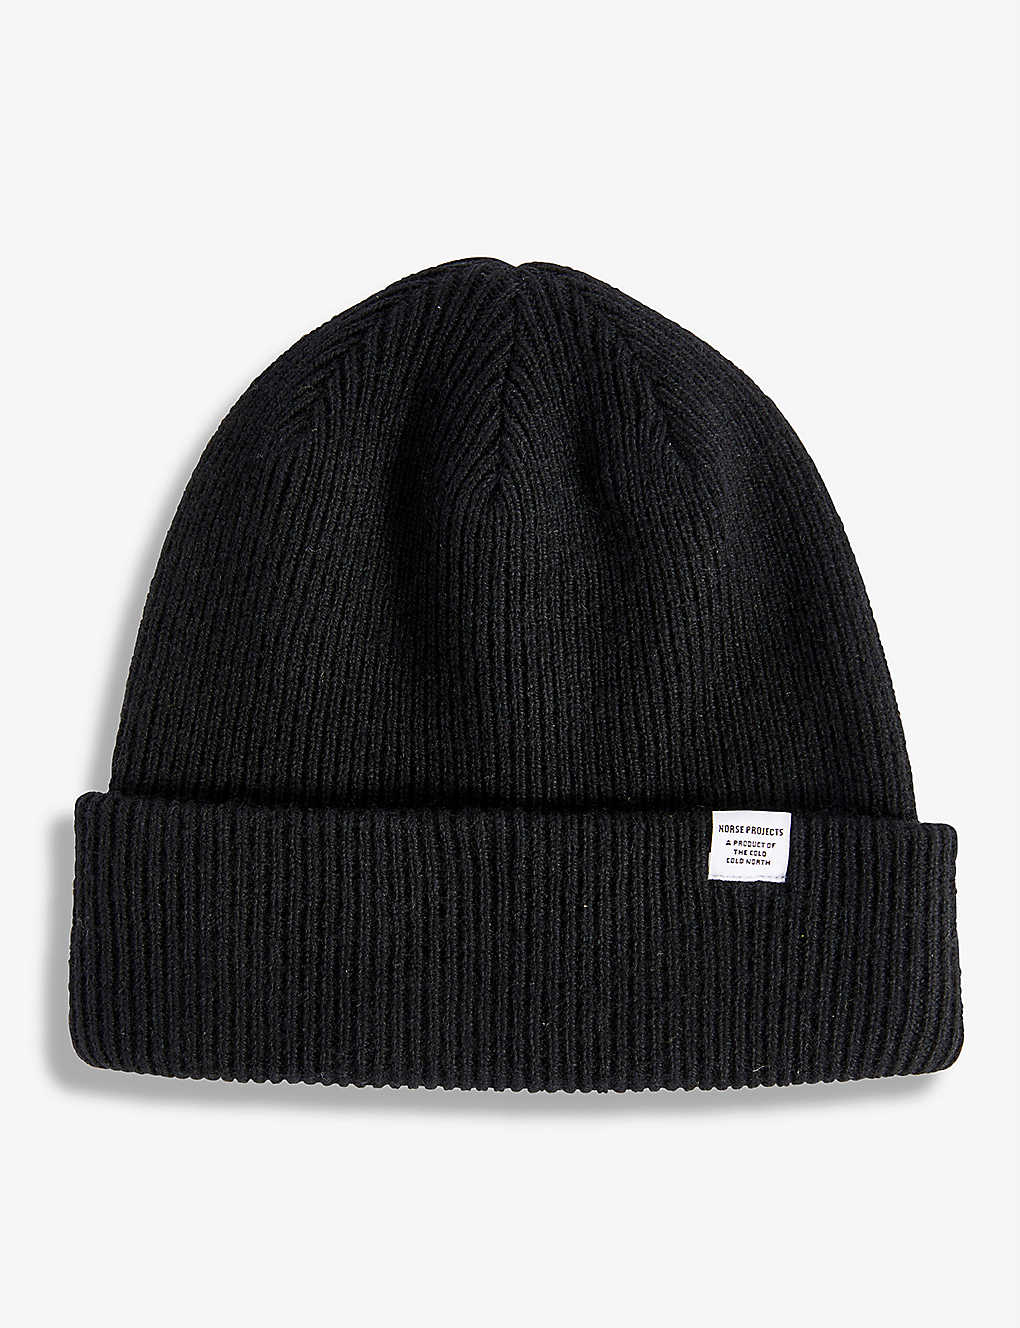 NORSE PROJECTS LOGO-TAB WOOL BEANIE HAT